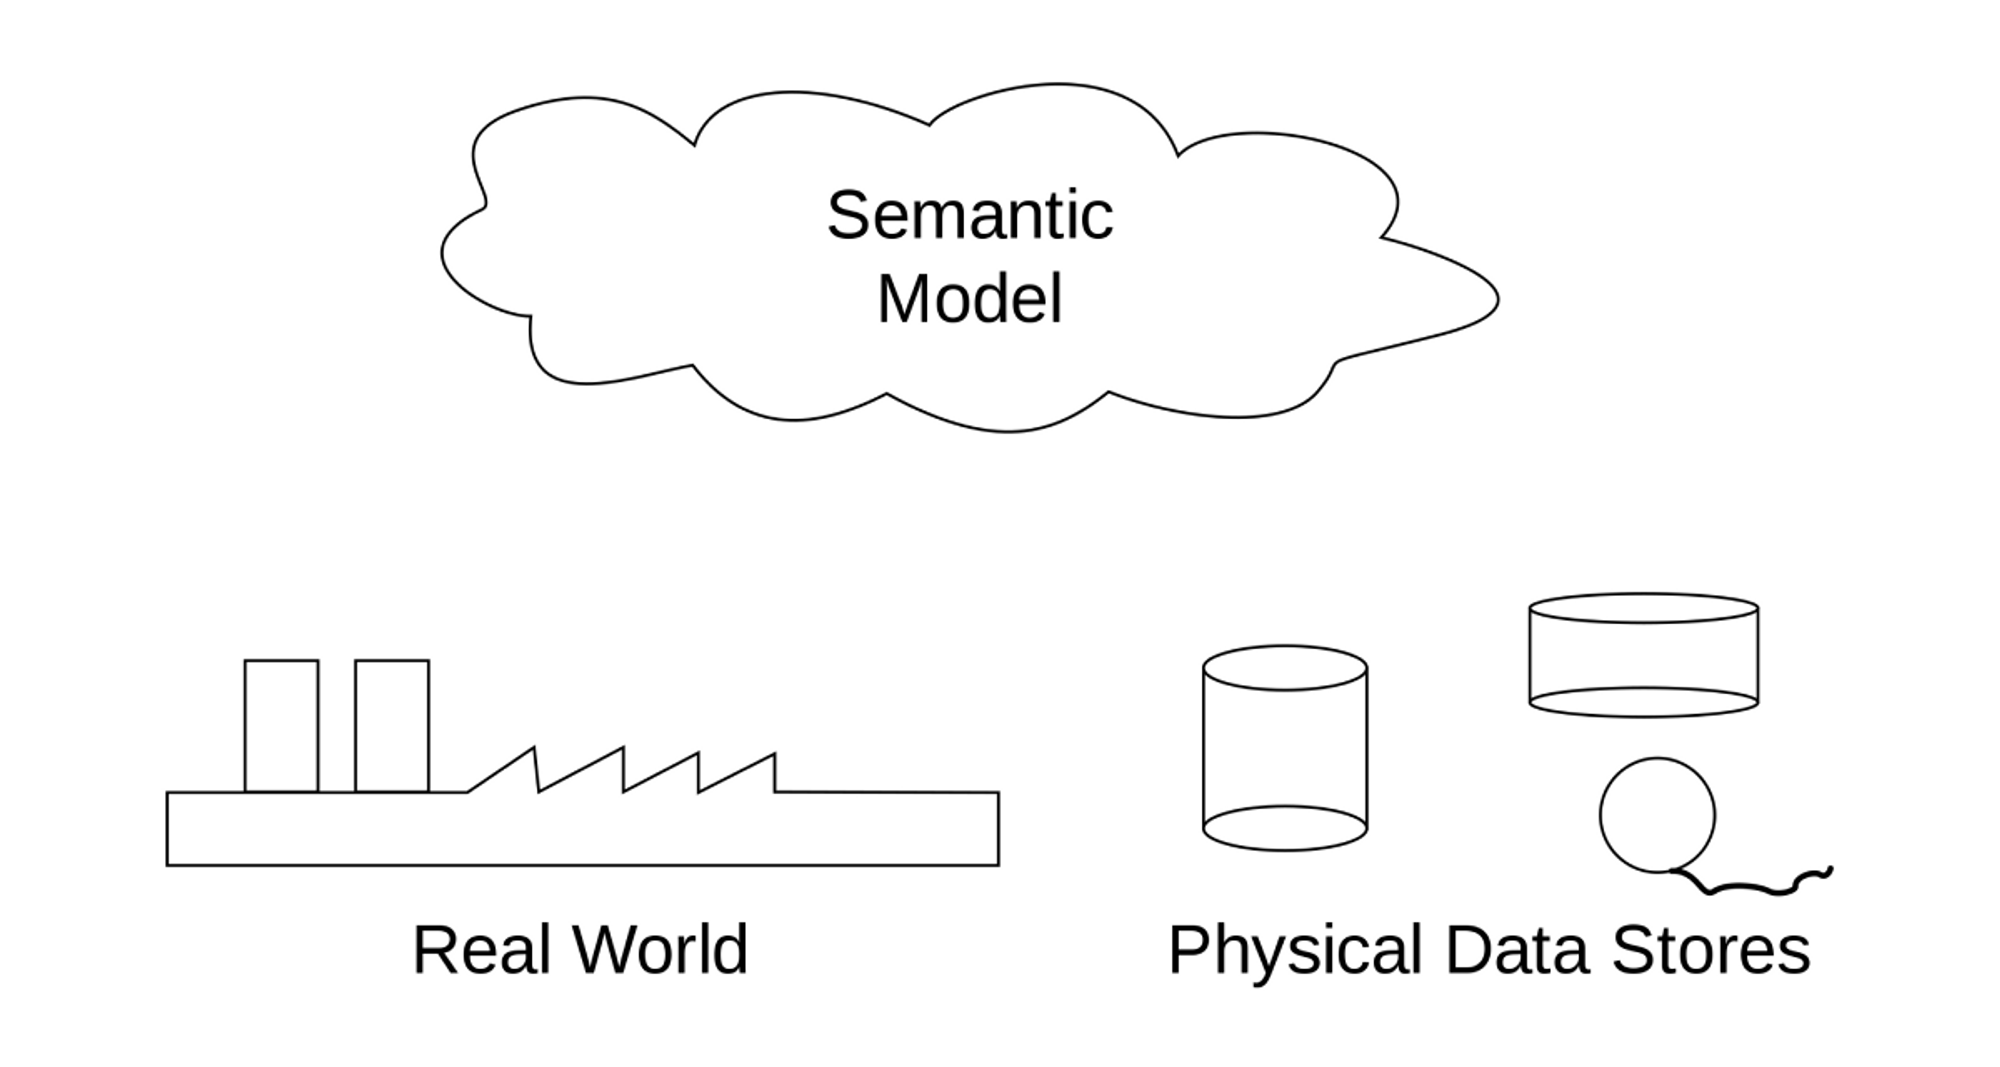 A cloud representing Semantic Models. Beneath it is a landscape representing the Real World, and shapes representing Physical Data Stores.